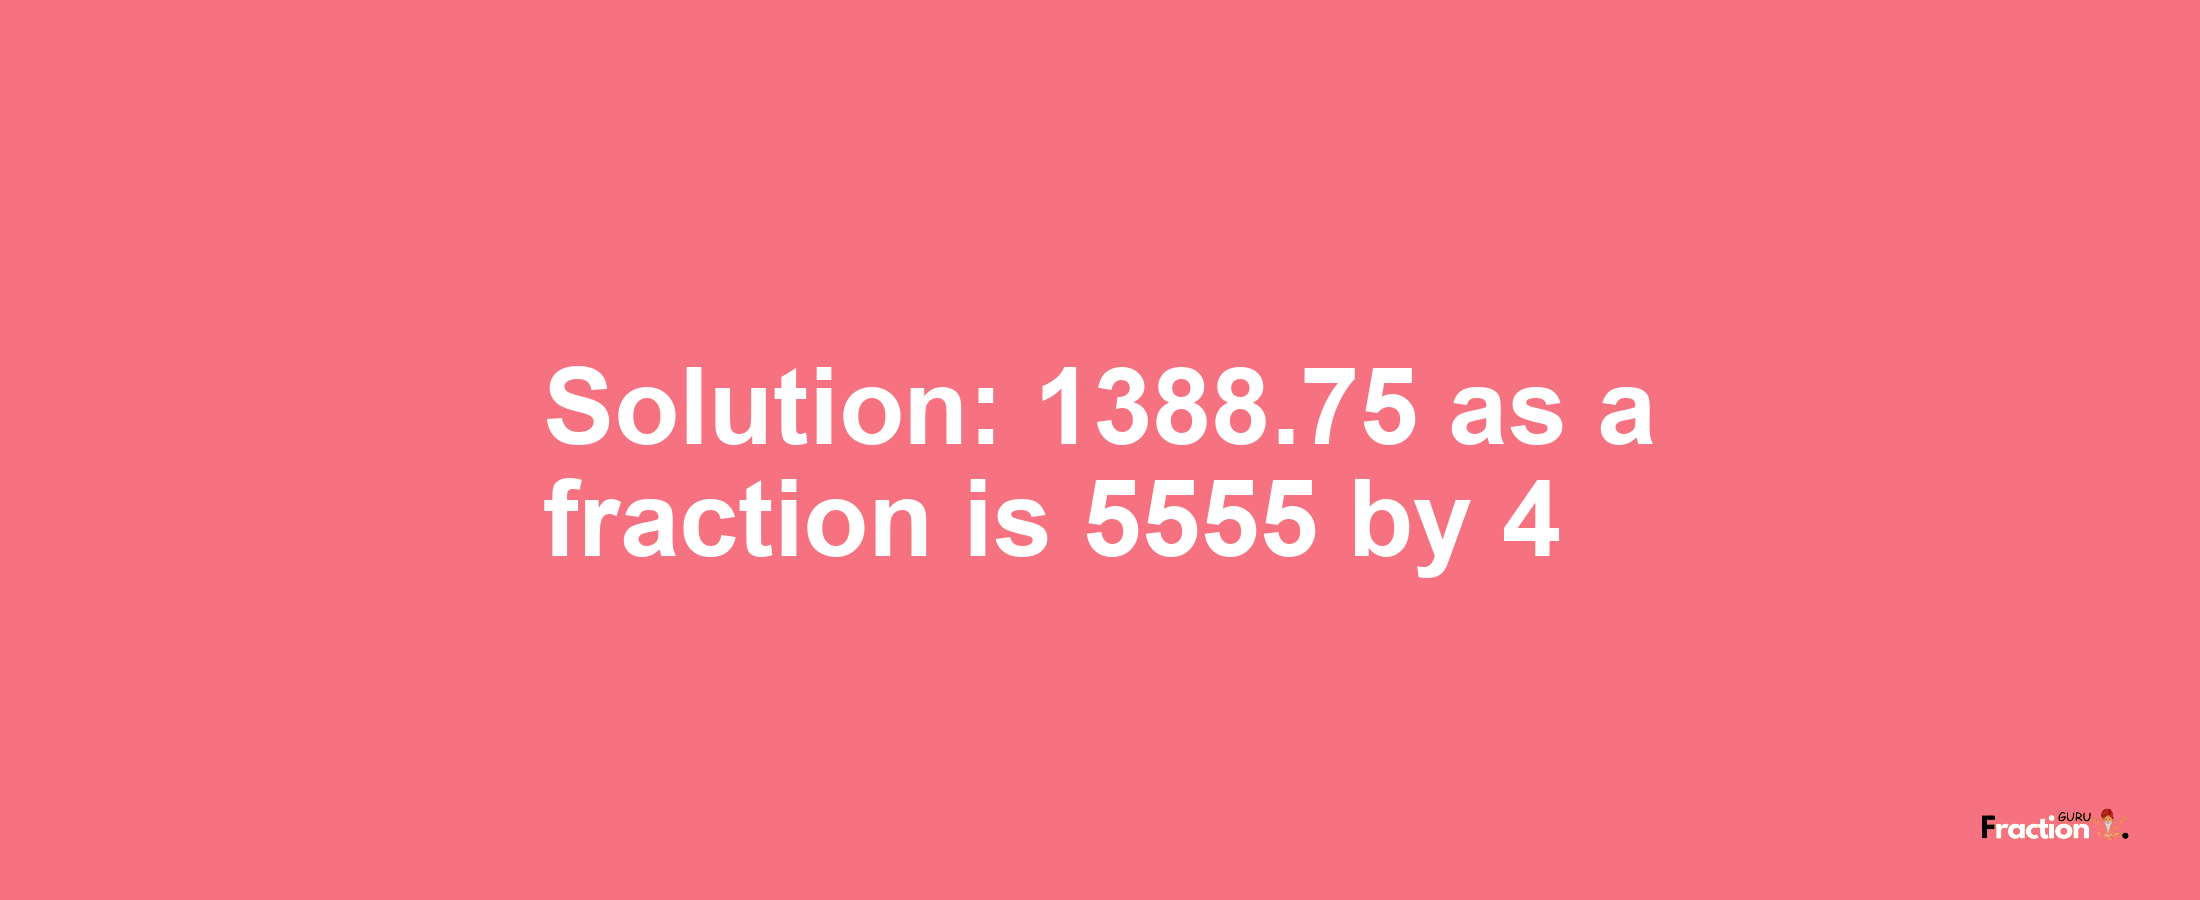 Solution:1388.75 as a fraction is 5555/4